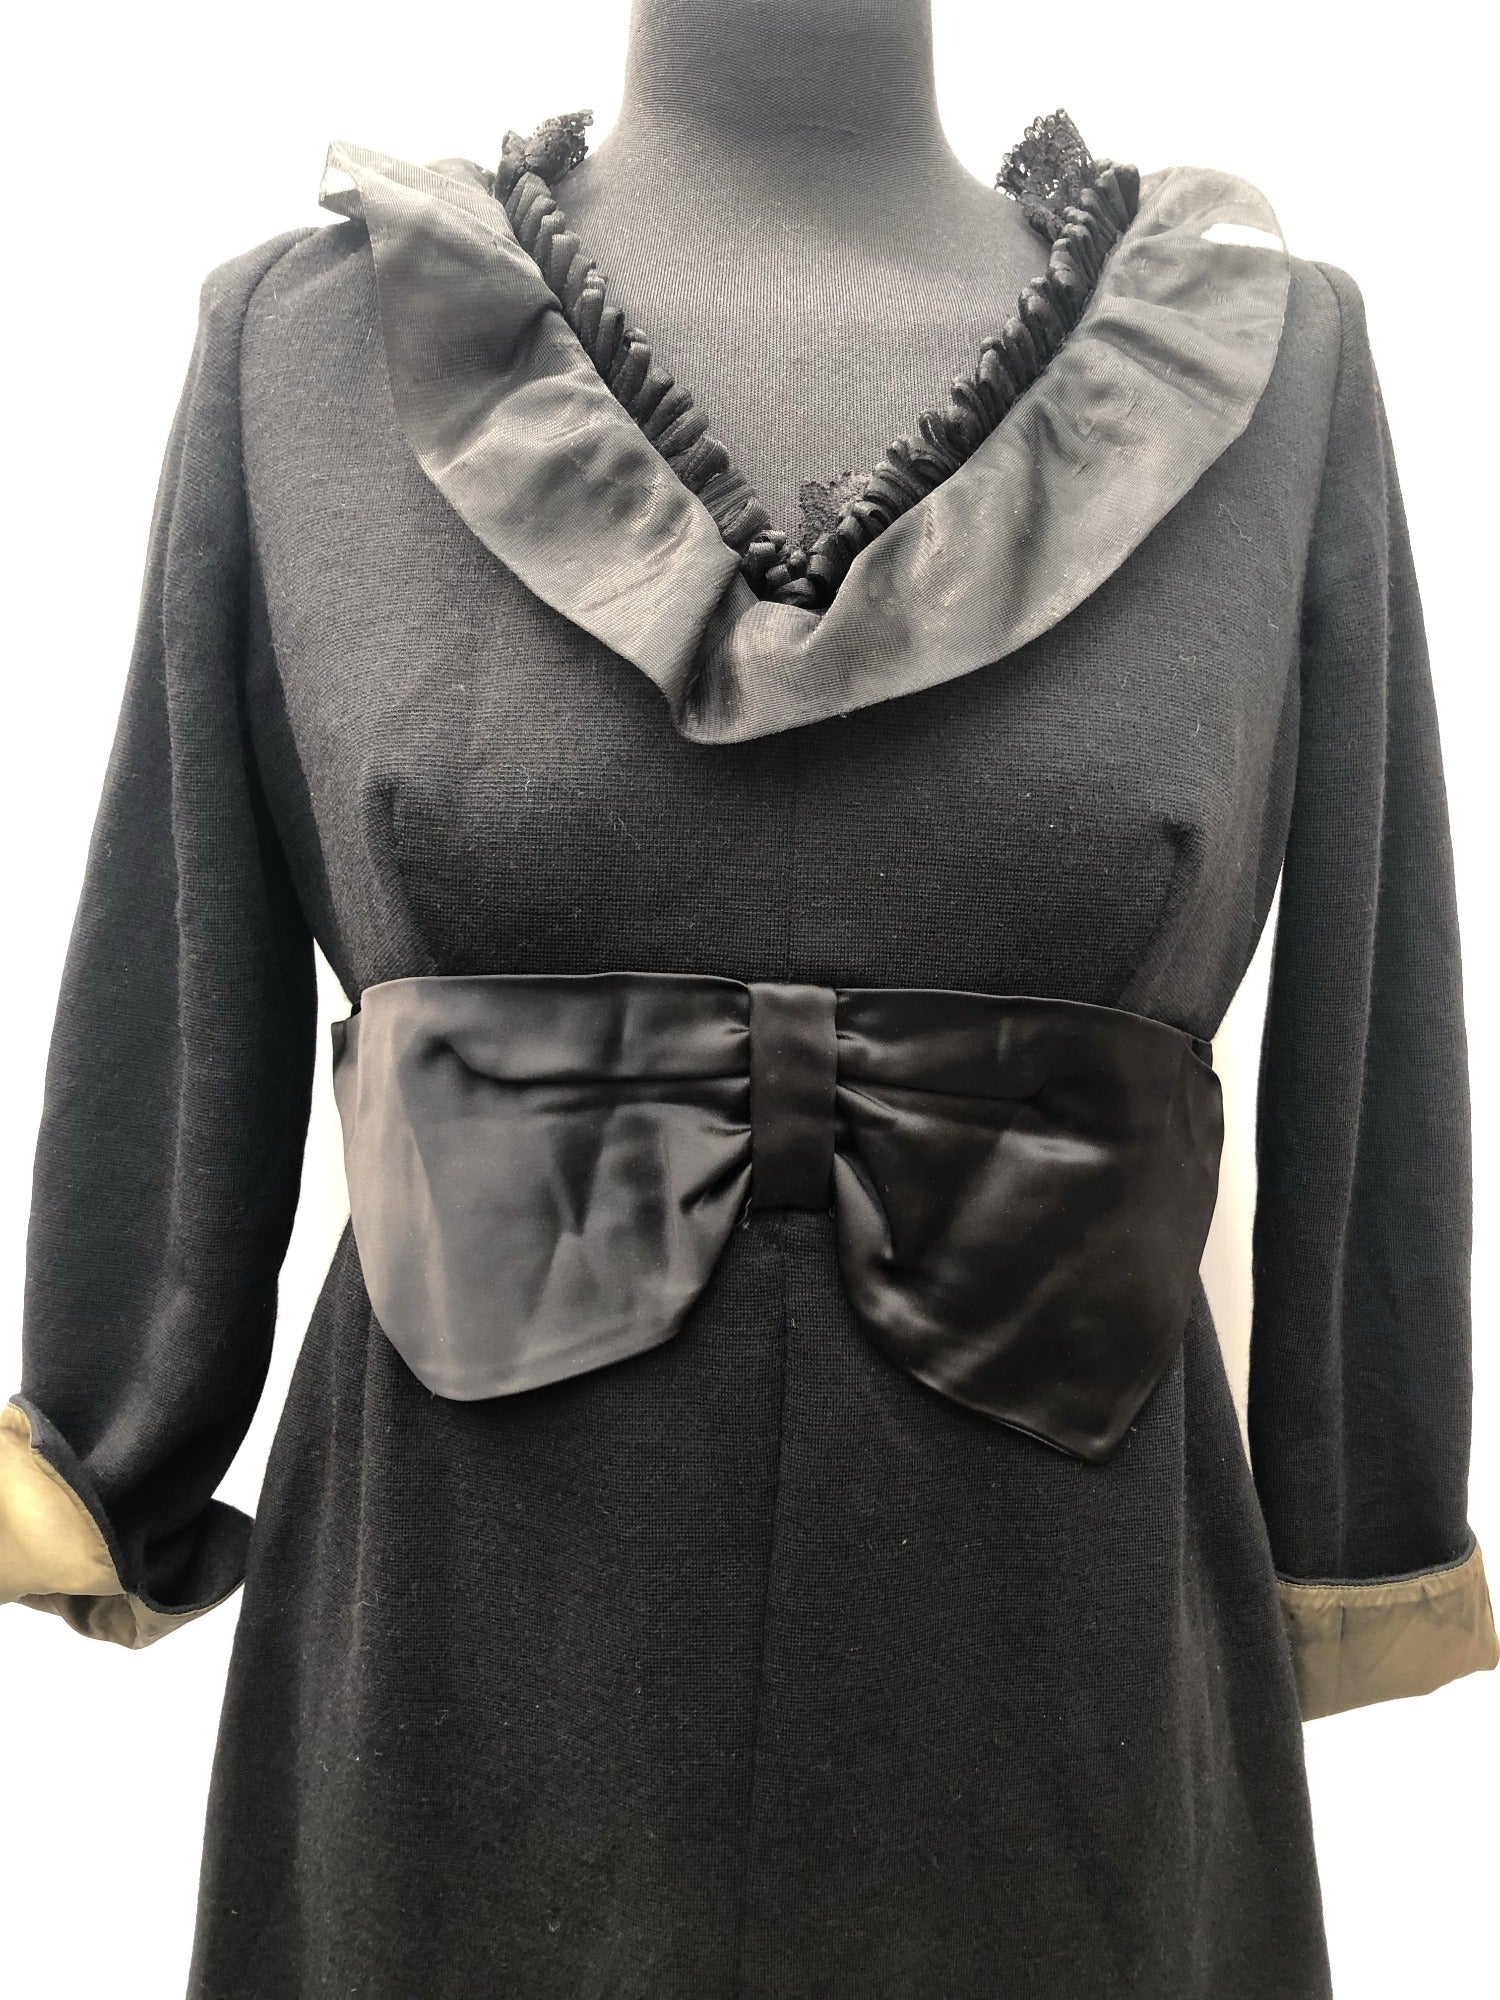  Blanes 1950's / 1960's Mini Dress in Black with Bow Detailing around the waist, lace and ruffle detailing around the neck, turnover olive green cuffs and fully lined with a zip back fastening and long sleeves. 